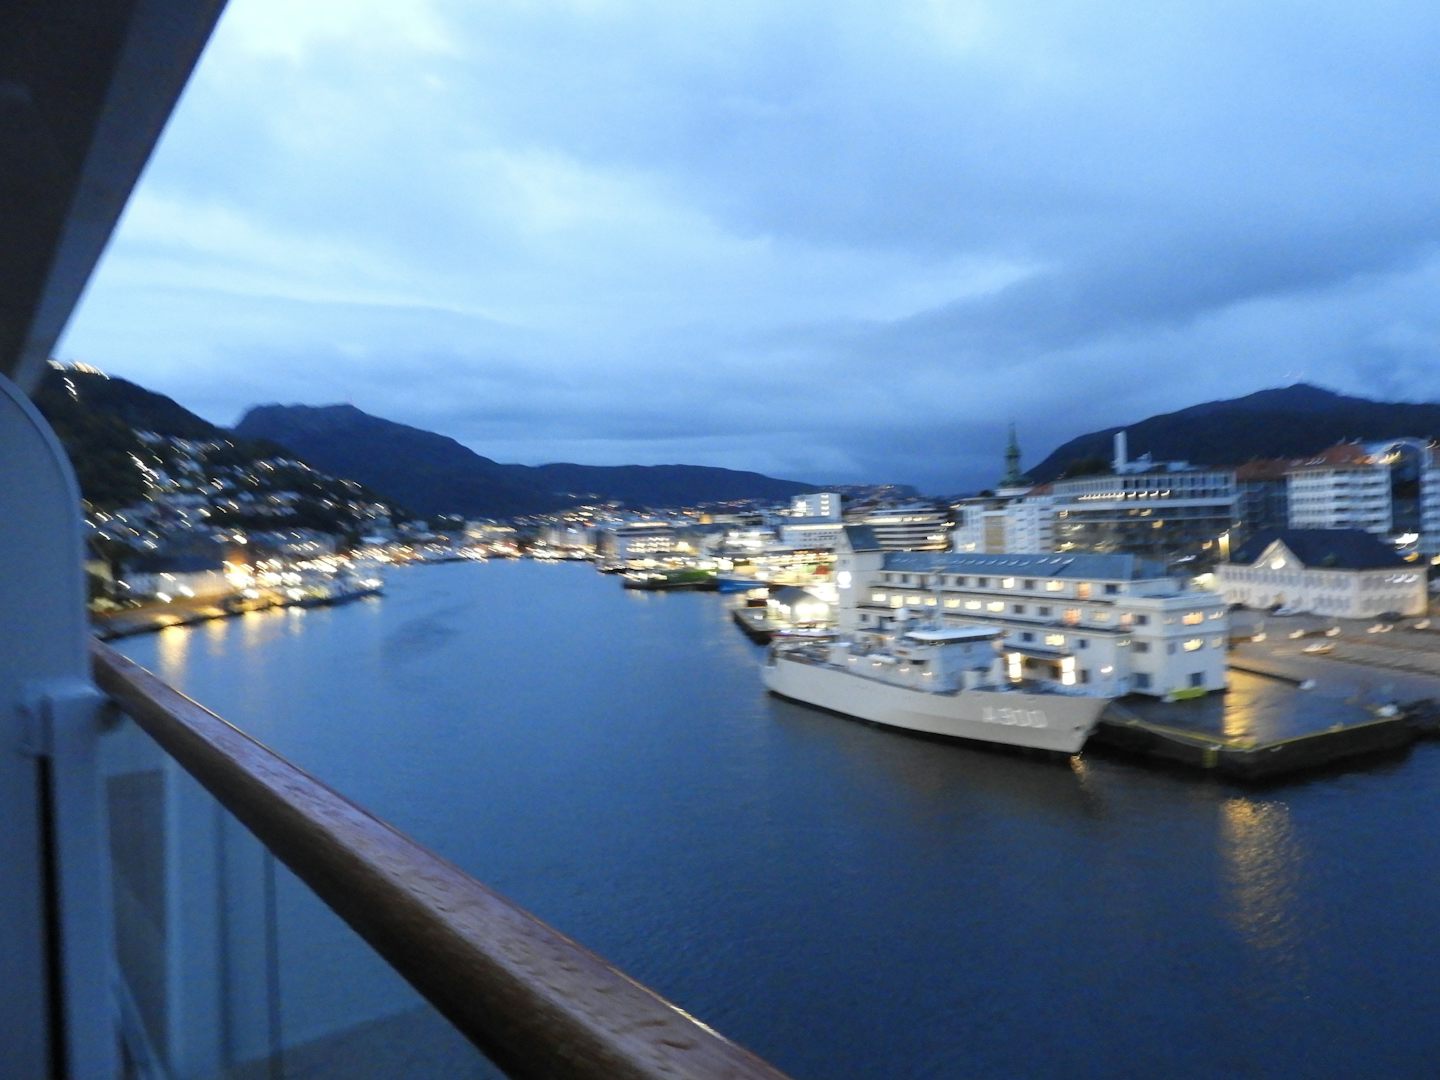 Bergen, Norway from the balcony